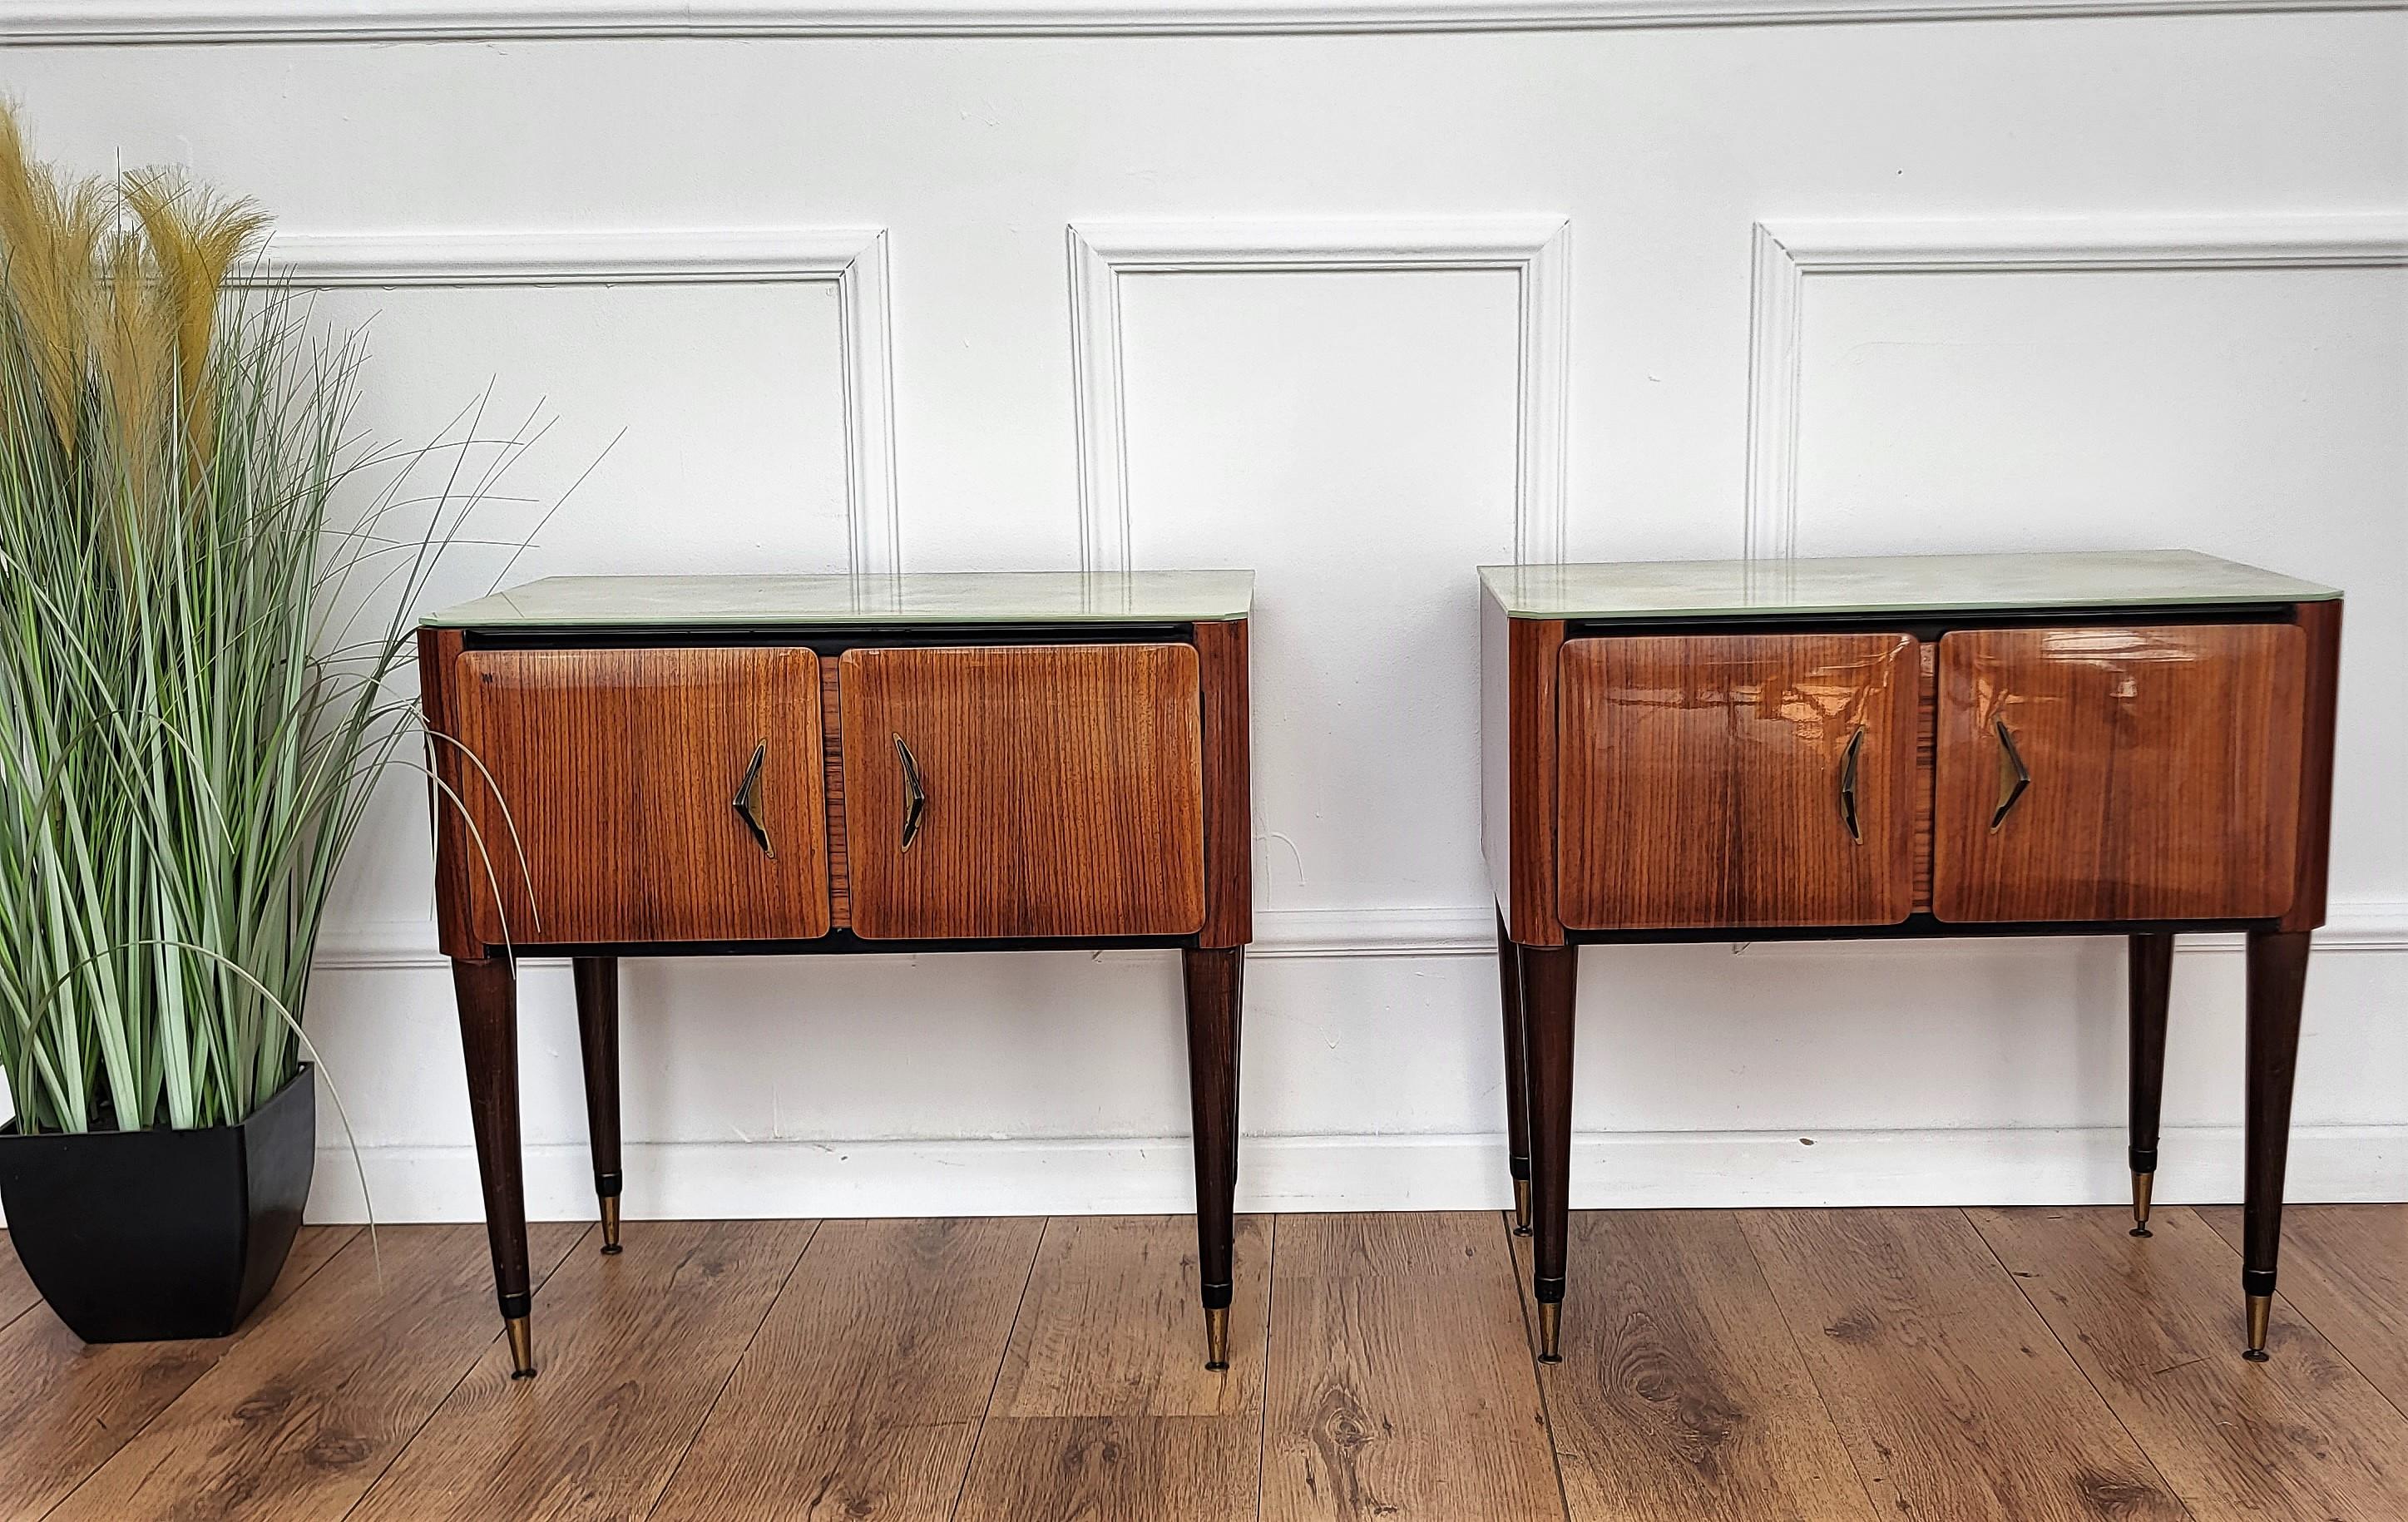 Very elegant and refined Italian 1950s Mid-Century Modern, neoclassical, in typical Art Deco design, pair of bedside tables with wood double front door, white marble lacquered glass top and brass details such as the 2 handles and the 4 foot ends.